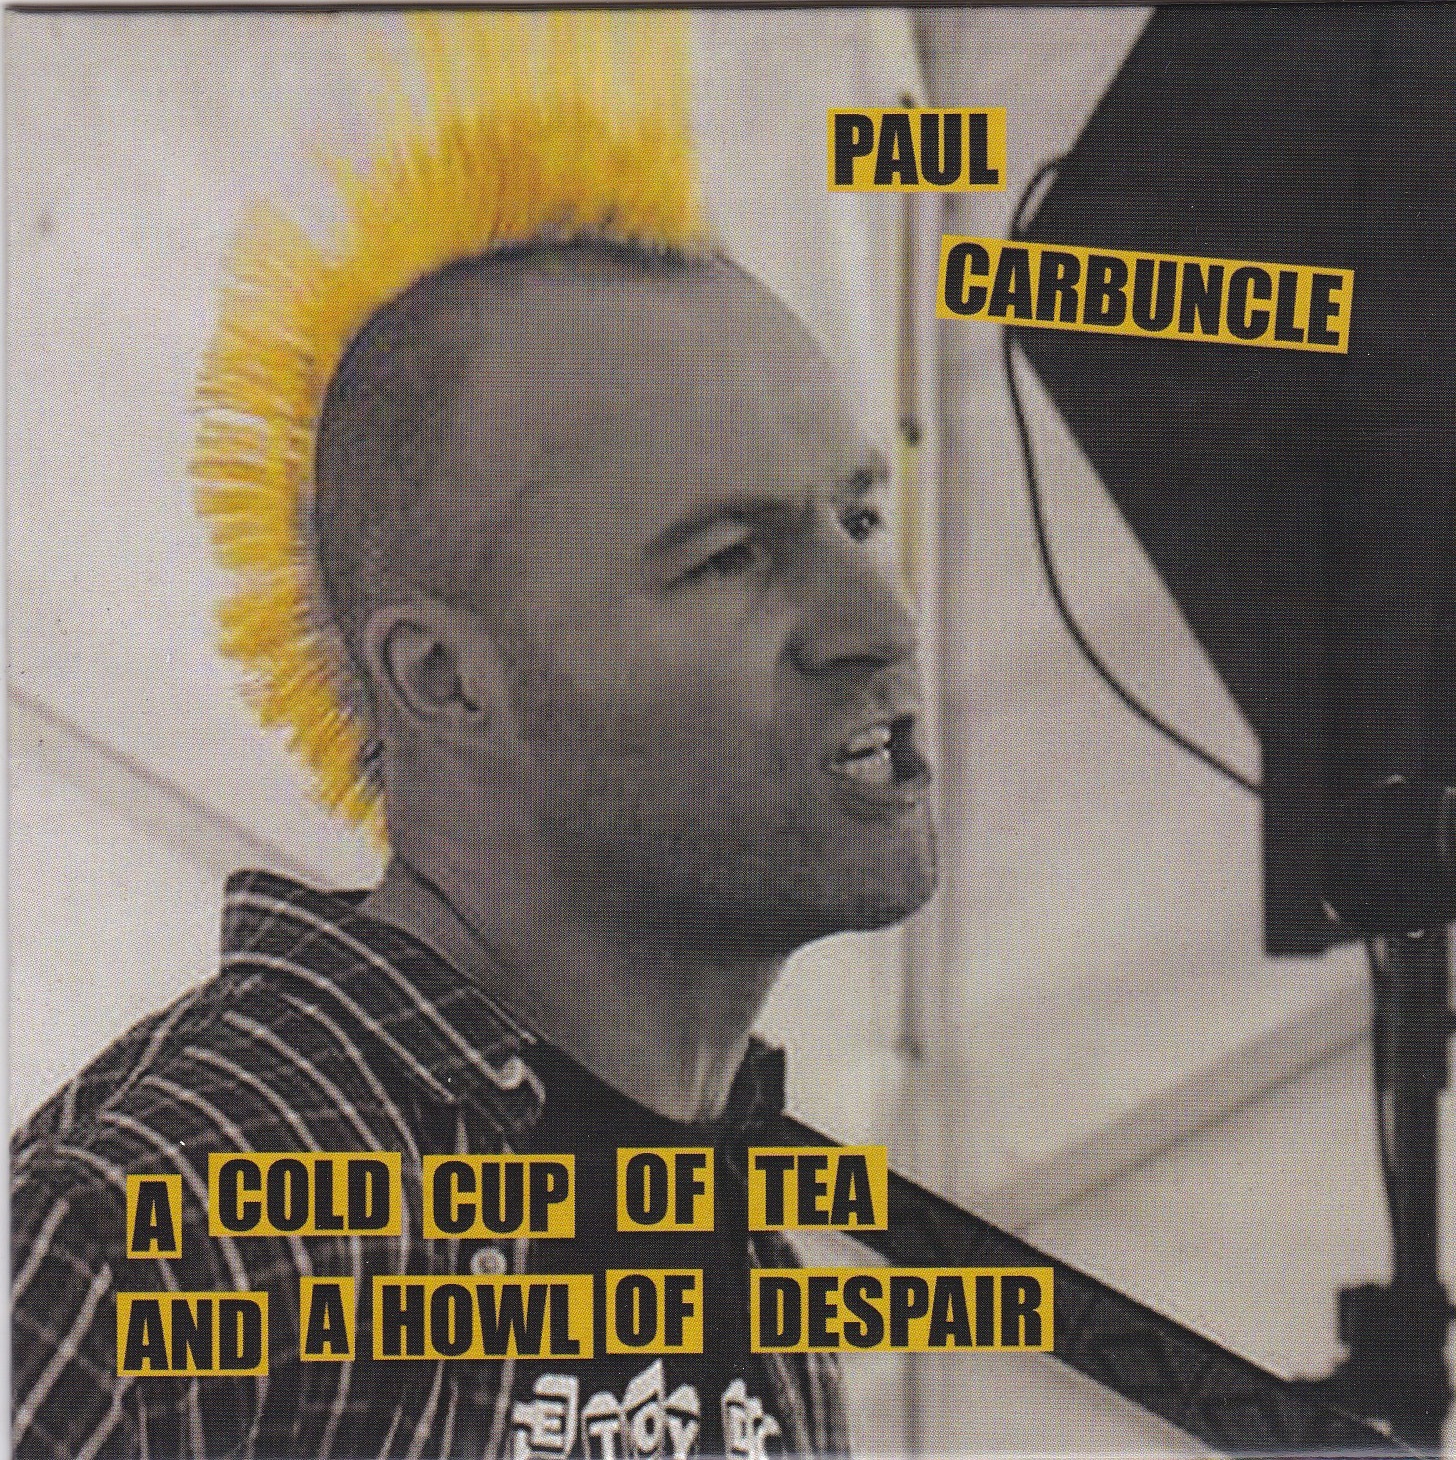 Paul Carbuncle A Cold Cup Of Tea CD (sleeve front)